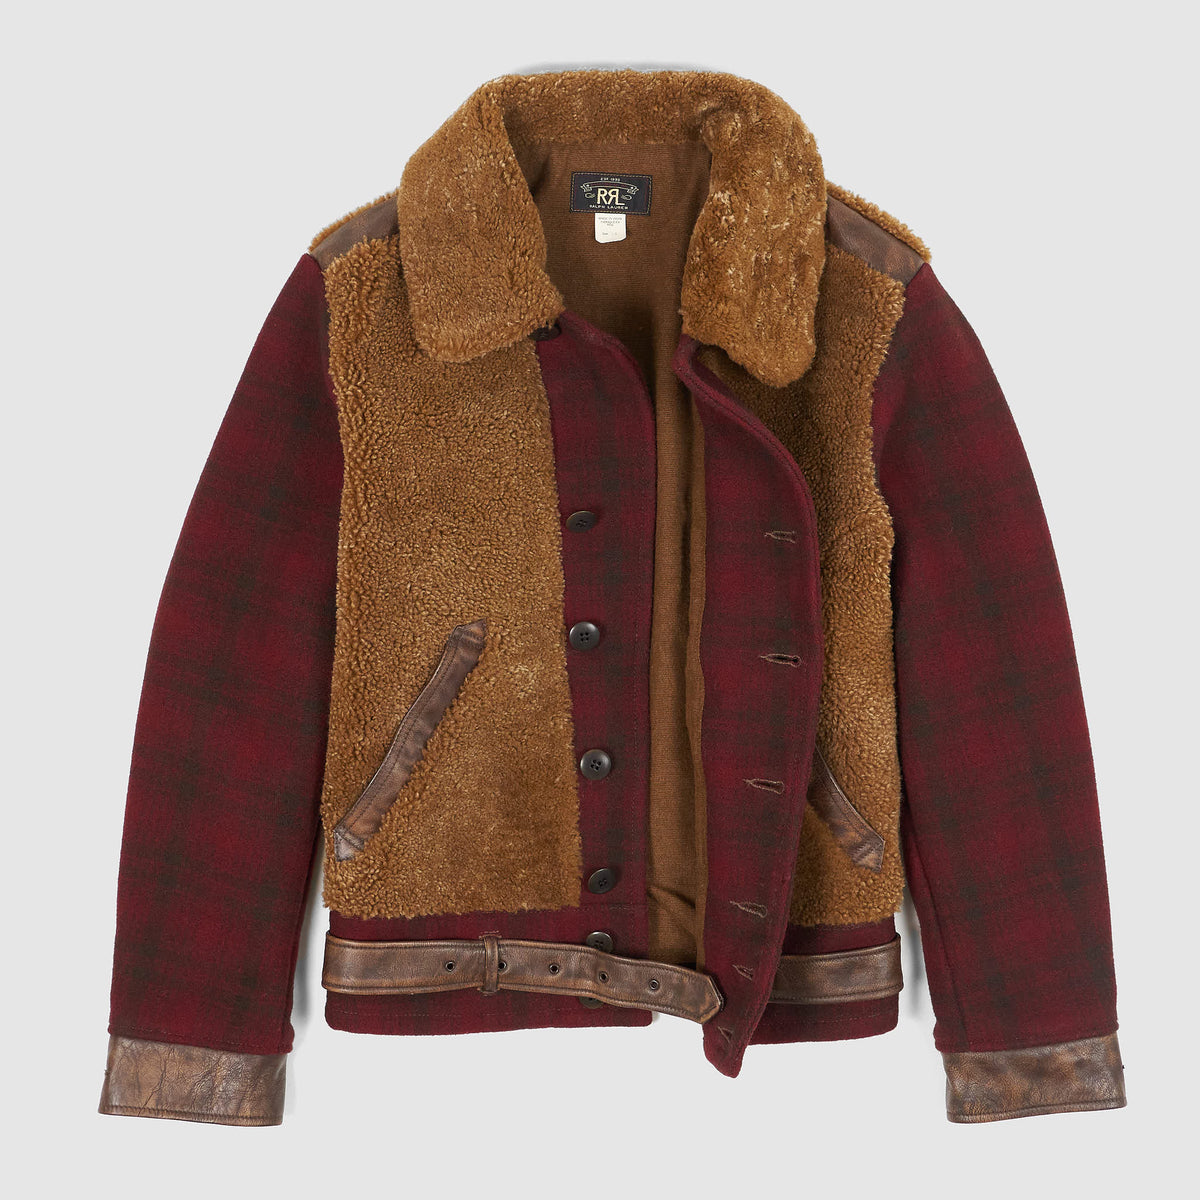 Double RL Wool Plaid Grizzly Jacket